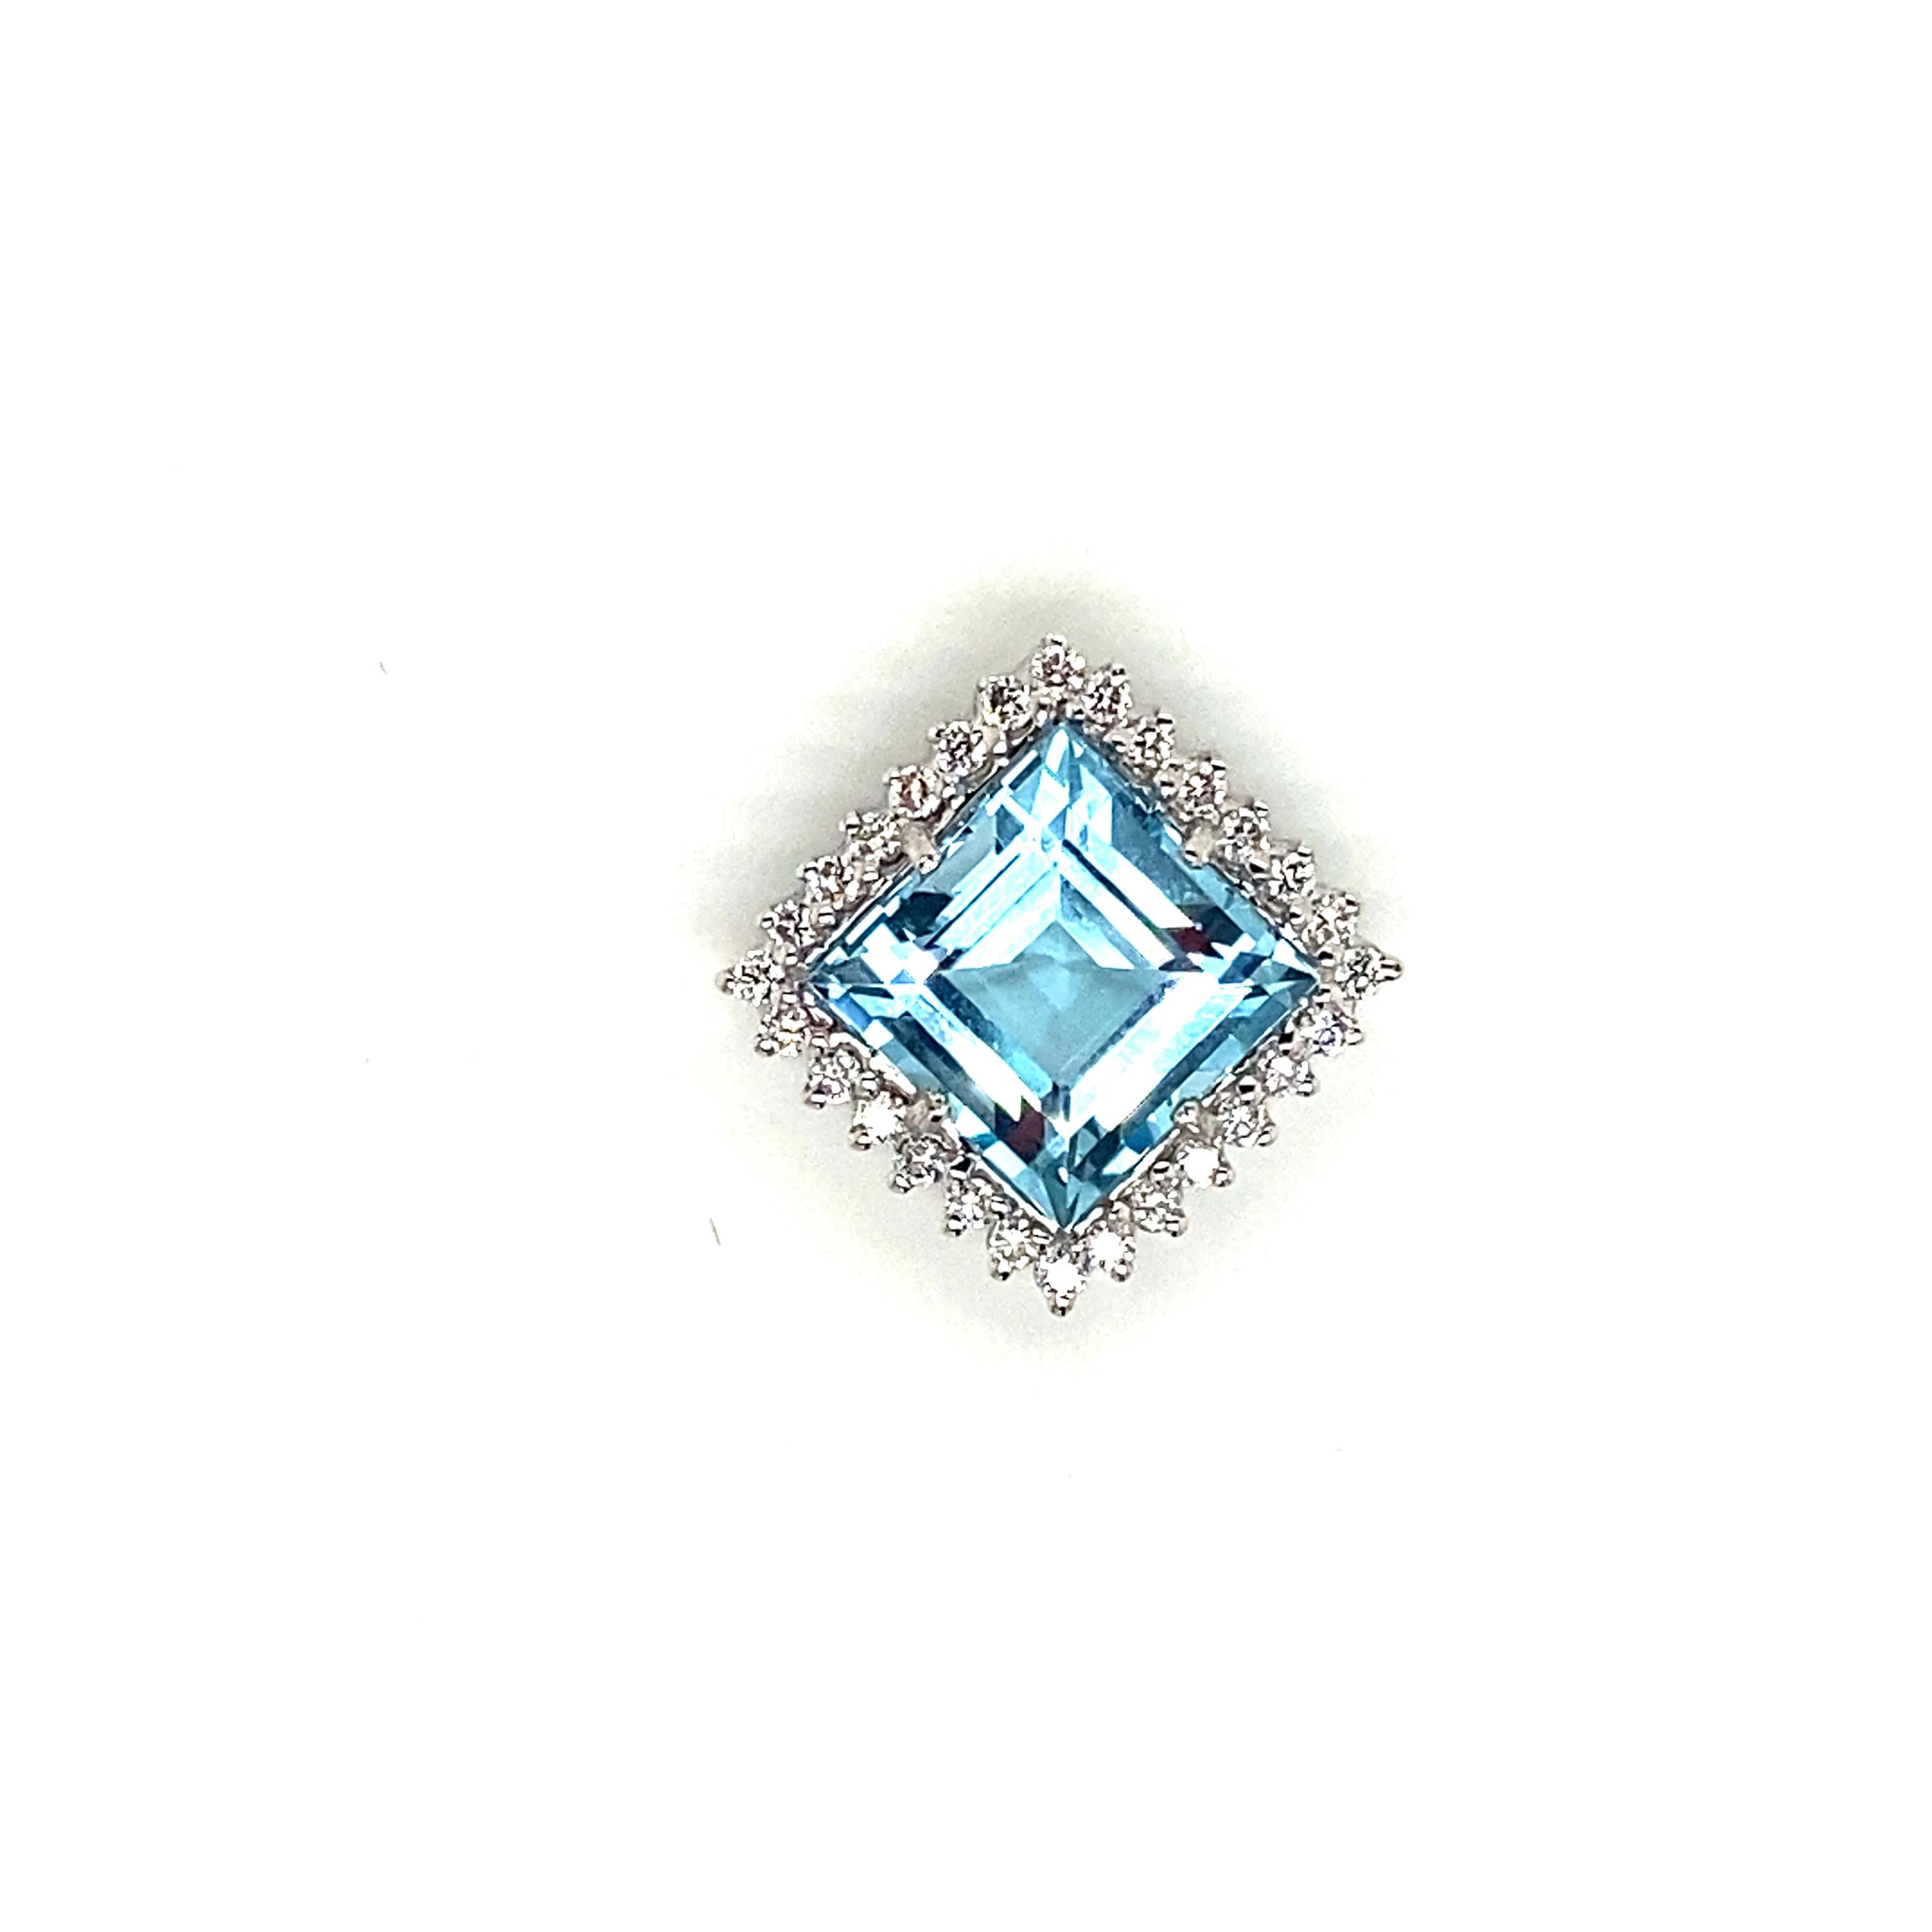 5.74 Carat Blue Topaz and White Diamond Gold Pendant:

A cute pendant, it features a gorgeous asscher-cut blue topaz weighing 5.74 carat surrounded by a halo of white round brilliant-cut diamonds weighing 0.34 carat. The topaz possesses a soothing